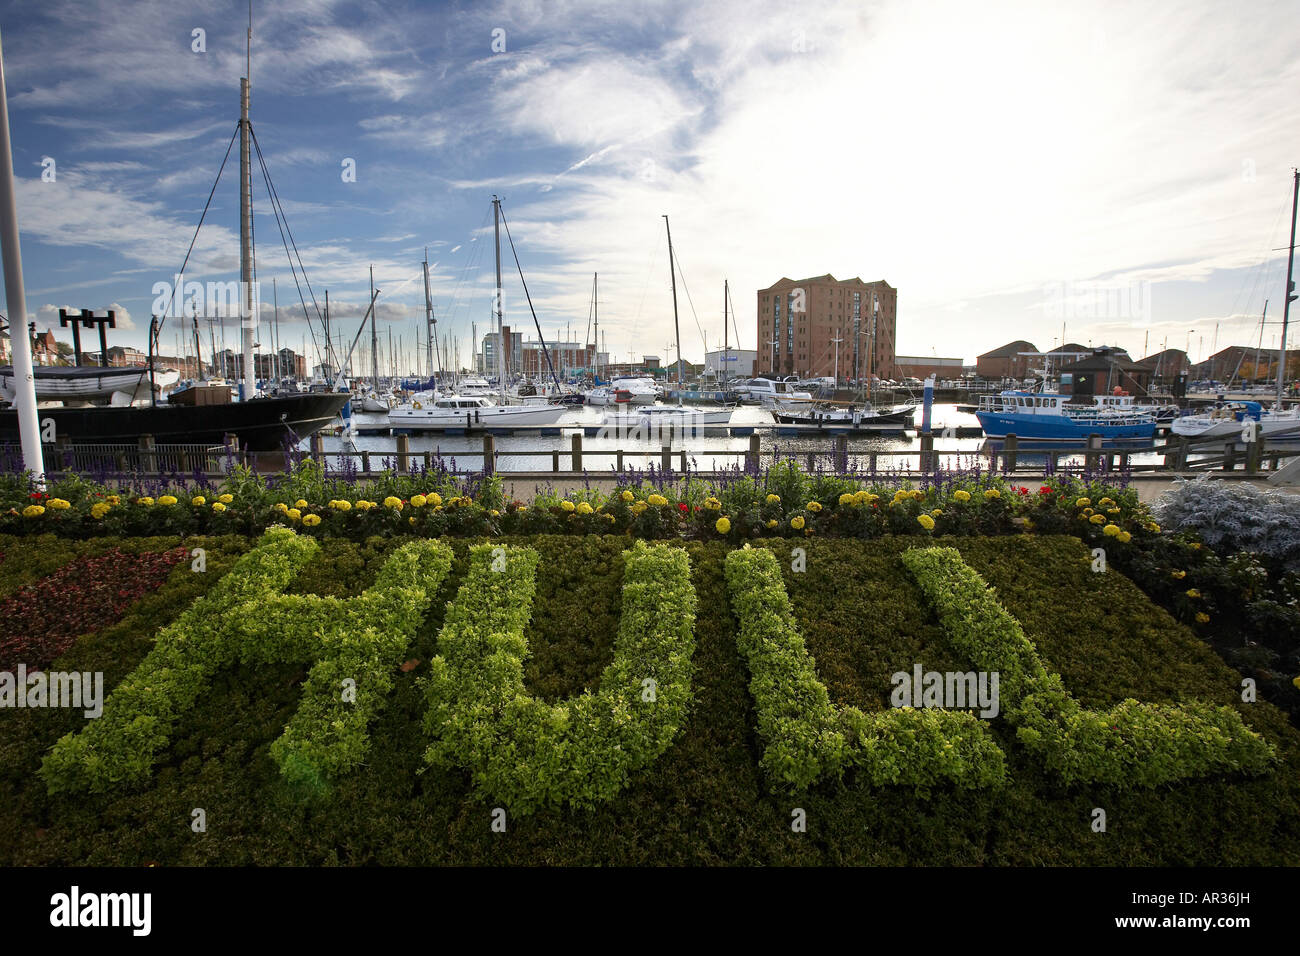 Flower bed in the shape of Hull Yachts and boats Hull Marina Kingston upon Hull East Yorkshire England UK Stock Photo